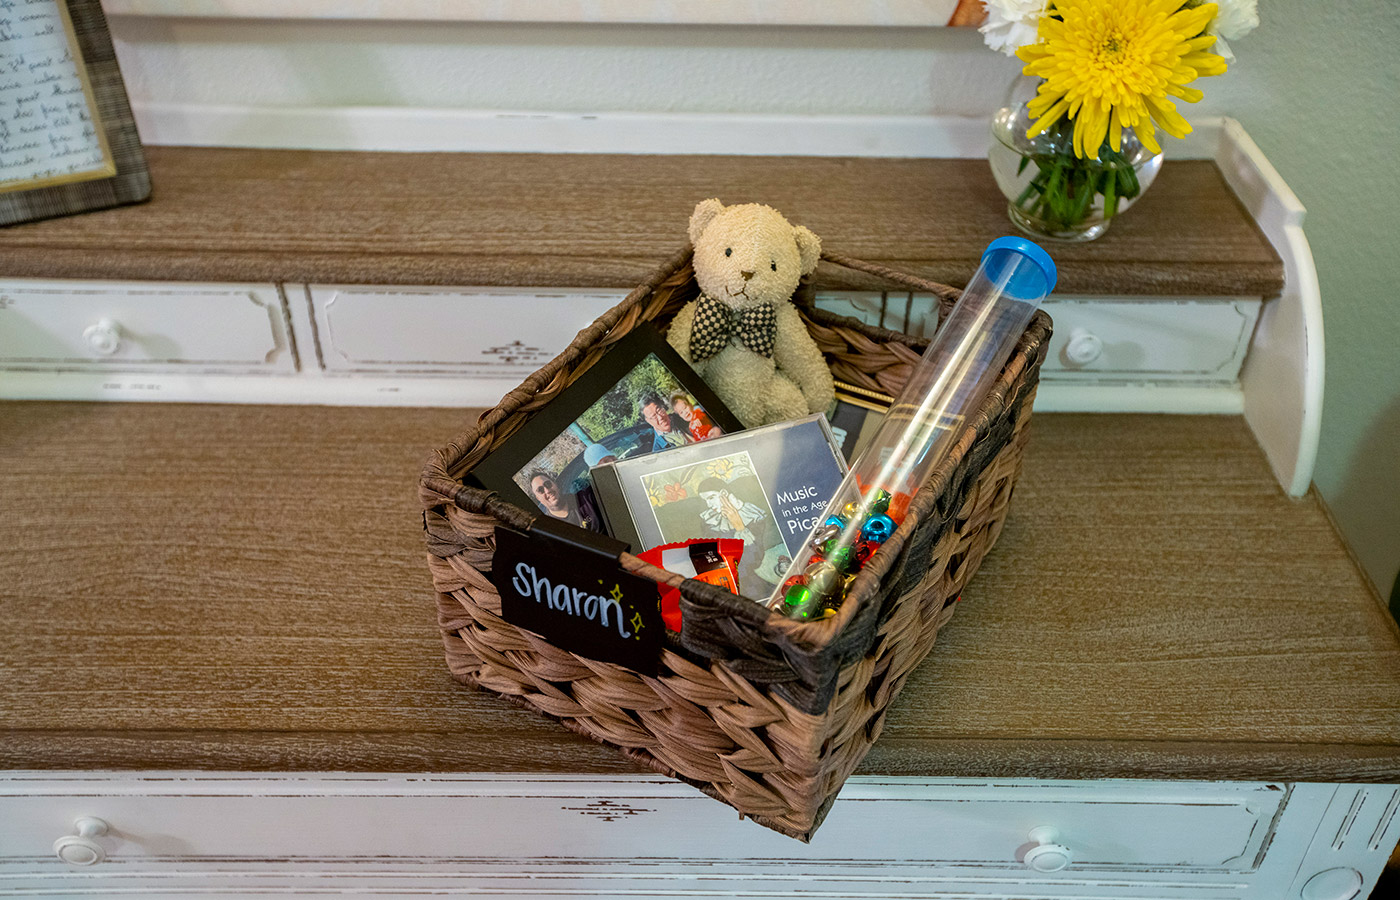 Basket with books and a teddy bear next to some flowers.